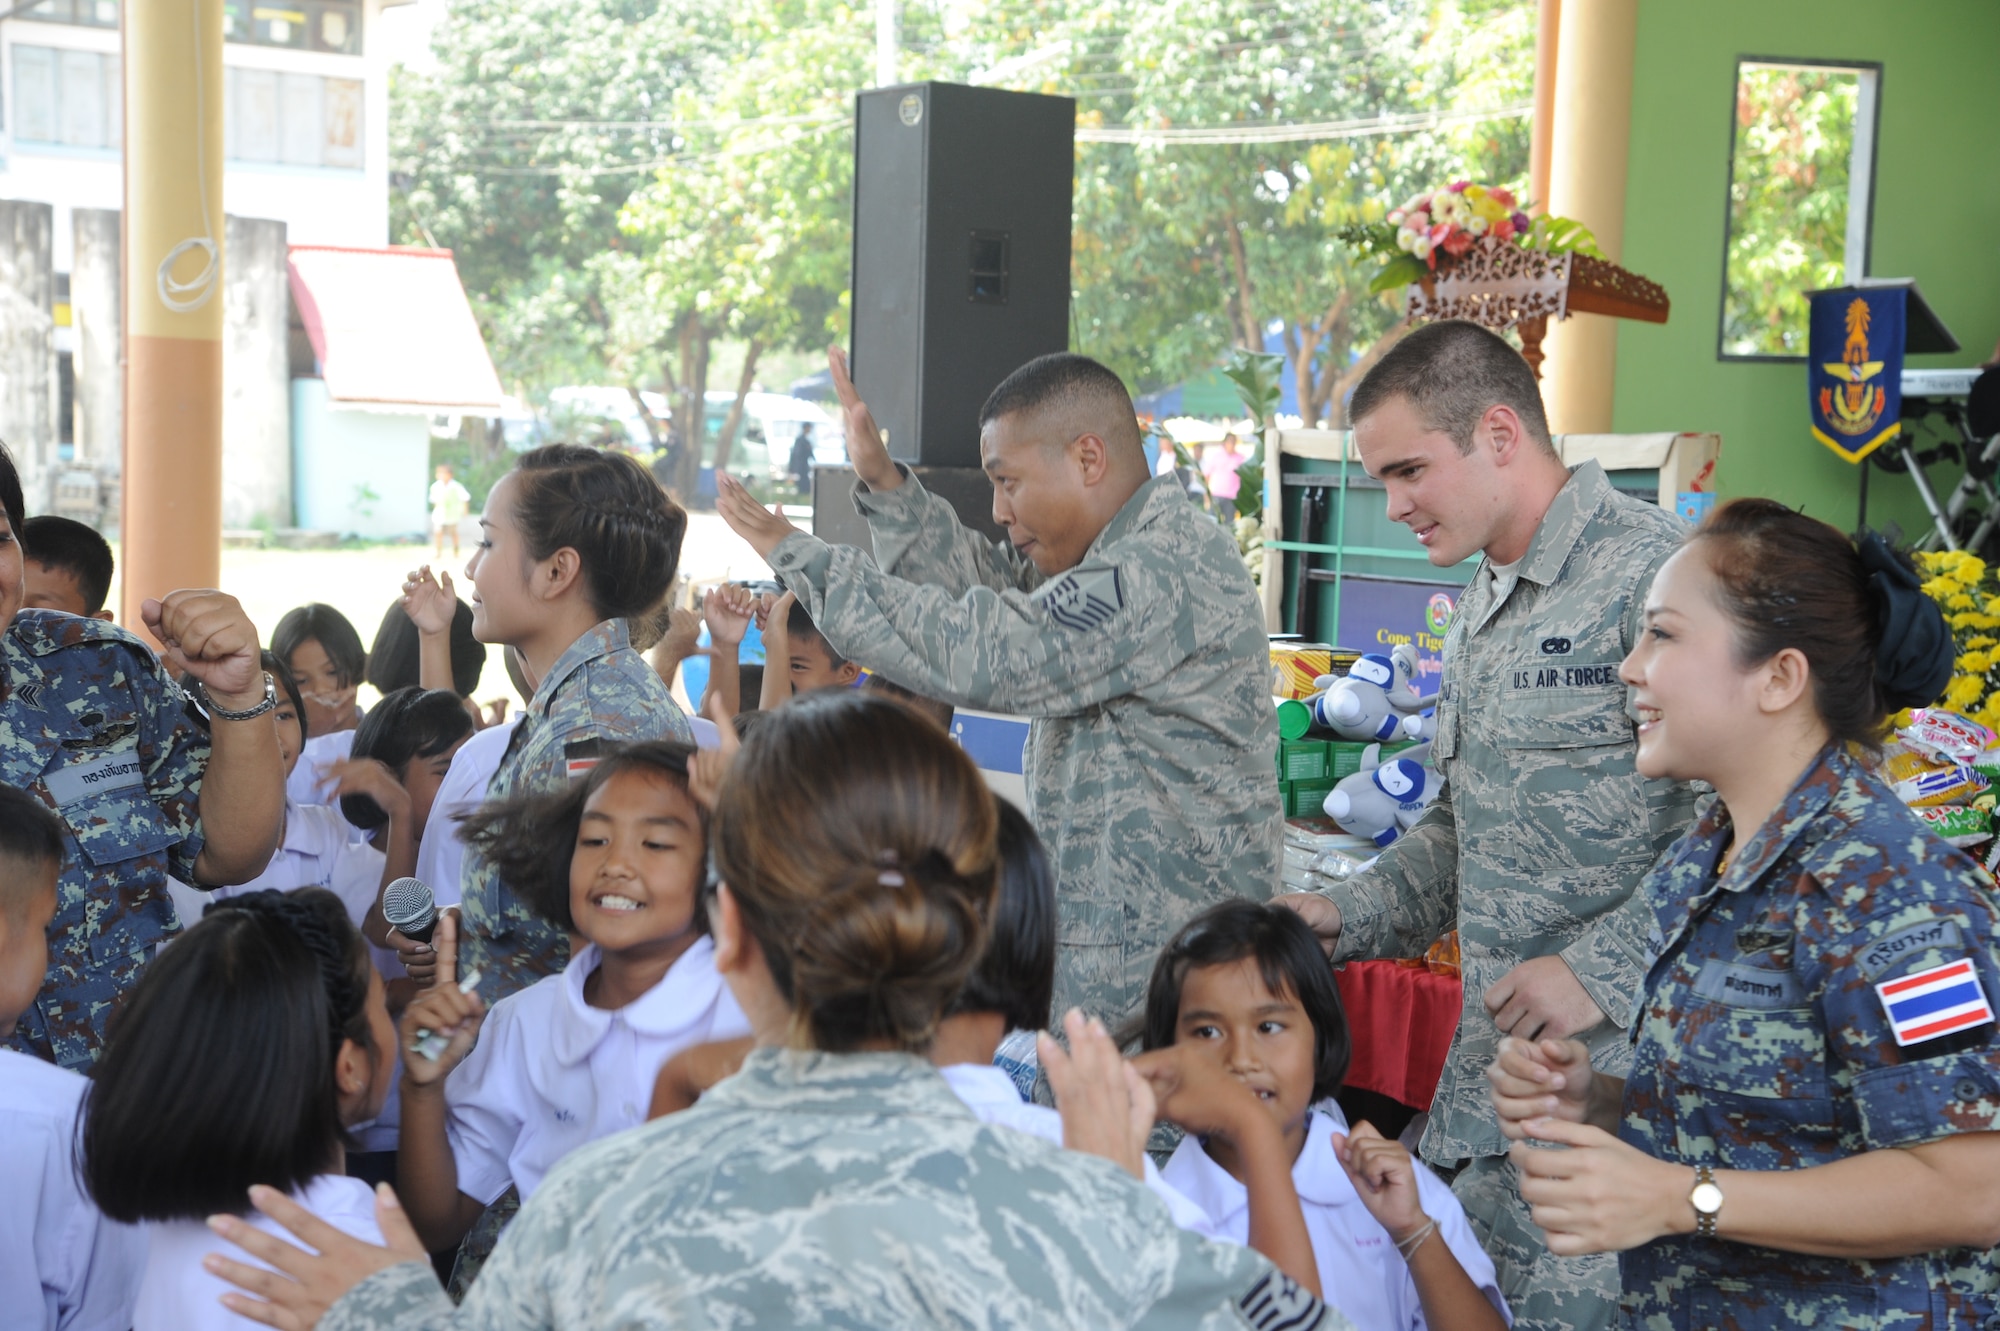 Master Sgt. Jason Adkins (center), Cope Tiger Customs liaison officer from Headquarters Pacific Air Forces, Joint Base Pearl Harbor-Hickam, Hawaii, and Airman 1st Class Thomas Fitzgerald (right), Cope Tiger F-15 Eagle crew chief from the Florida National Guard's 125th Fighter Wing, Jacksonville, Florida, dance with children curing a community outreach and cultural exchange event, Mar. 13. The Airmen were at the Watprommarat School, which was visited by more than 40-Airmen from the U.S. Air Force, Republic of Singapore Air Force, and exercise host, Royal Thai Air Force. The Airmen are participating in exercise Cope Tiger, a large force air employment exercise designed to enhance readiness and interoperability among participating nations in the Asia-Pacific region. (U.S. Air Force Photo/Capt. David Herndon)